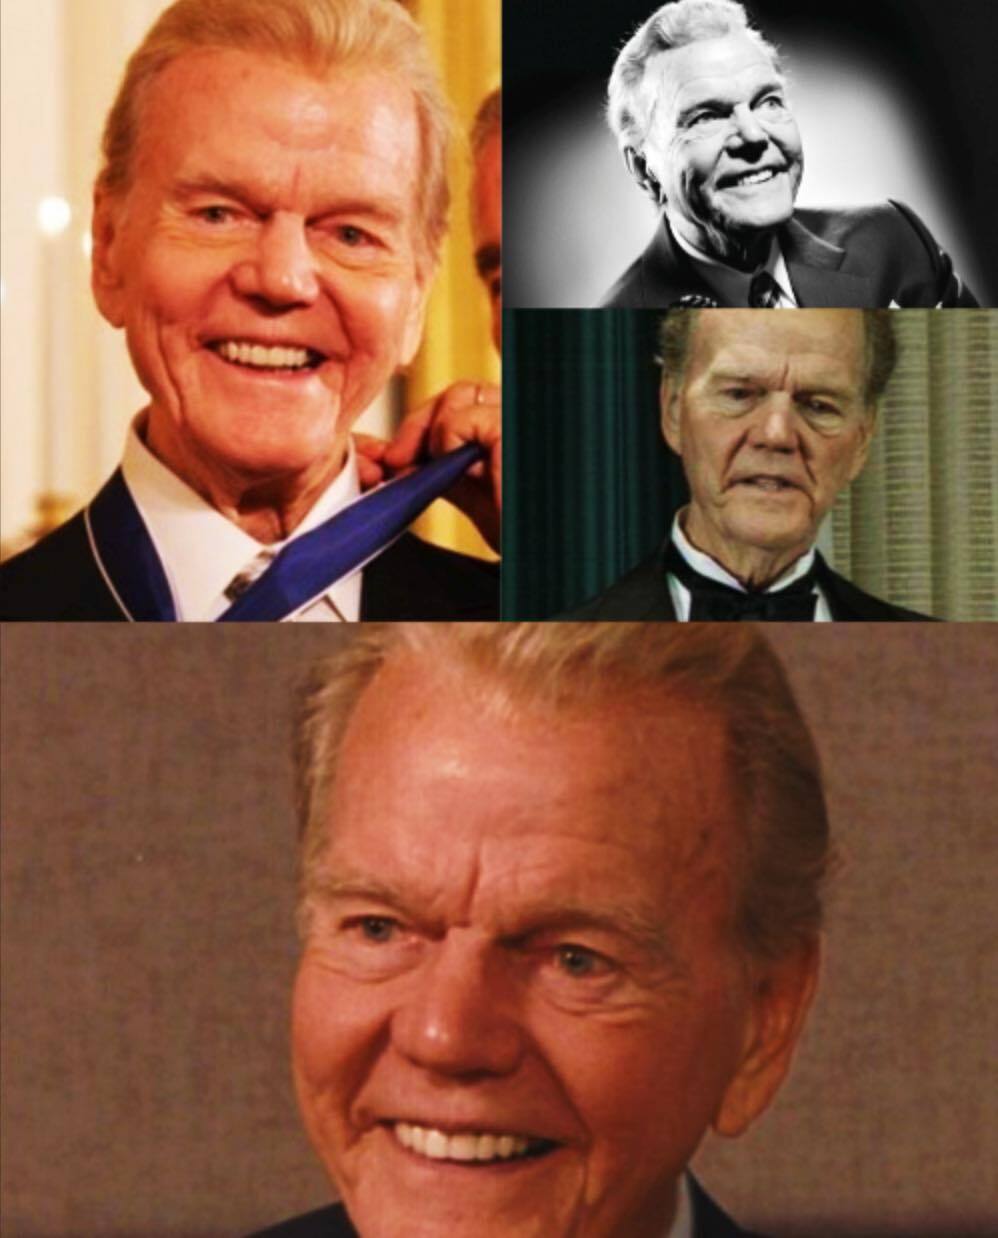 Paul Harvey made this forecast in 1965. Now hear His Terrifying Words…